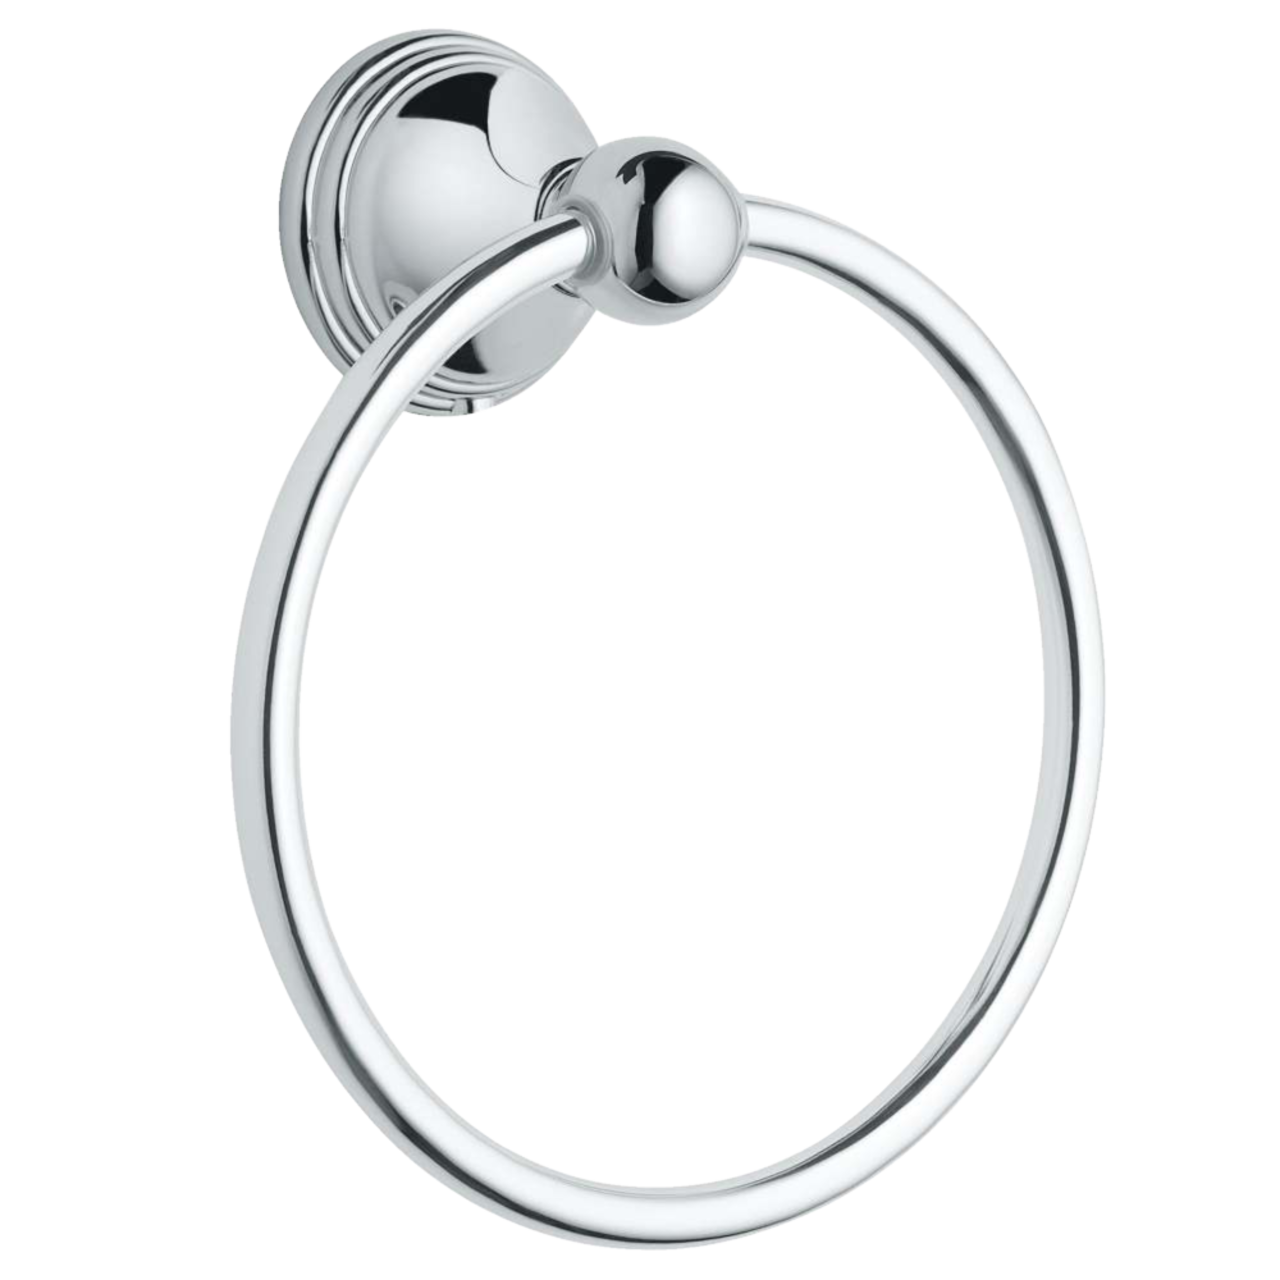 https://media-www.canadiantire.ca/product/fixing/plumbing/faucets-fixtures/0635177/moen-preston-towel-ring--50194e80-a729-4869-a309-7785fc0b29a5.png?imdensity=1&imwidth=1244&impolicy=mZoom